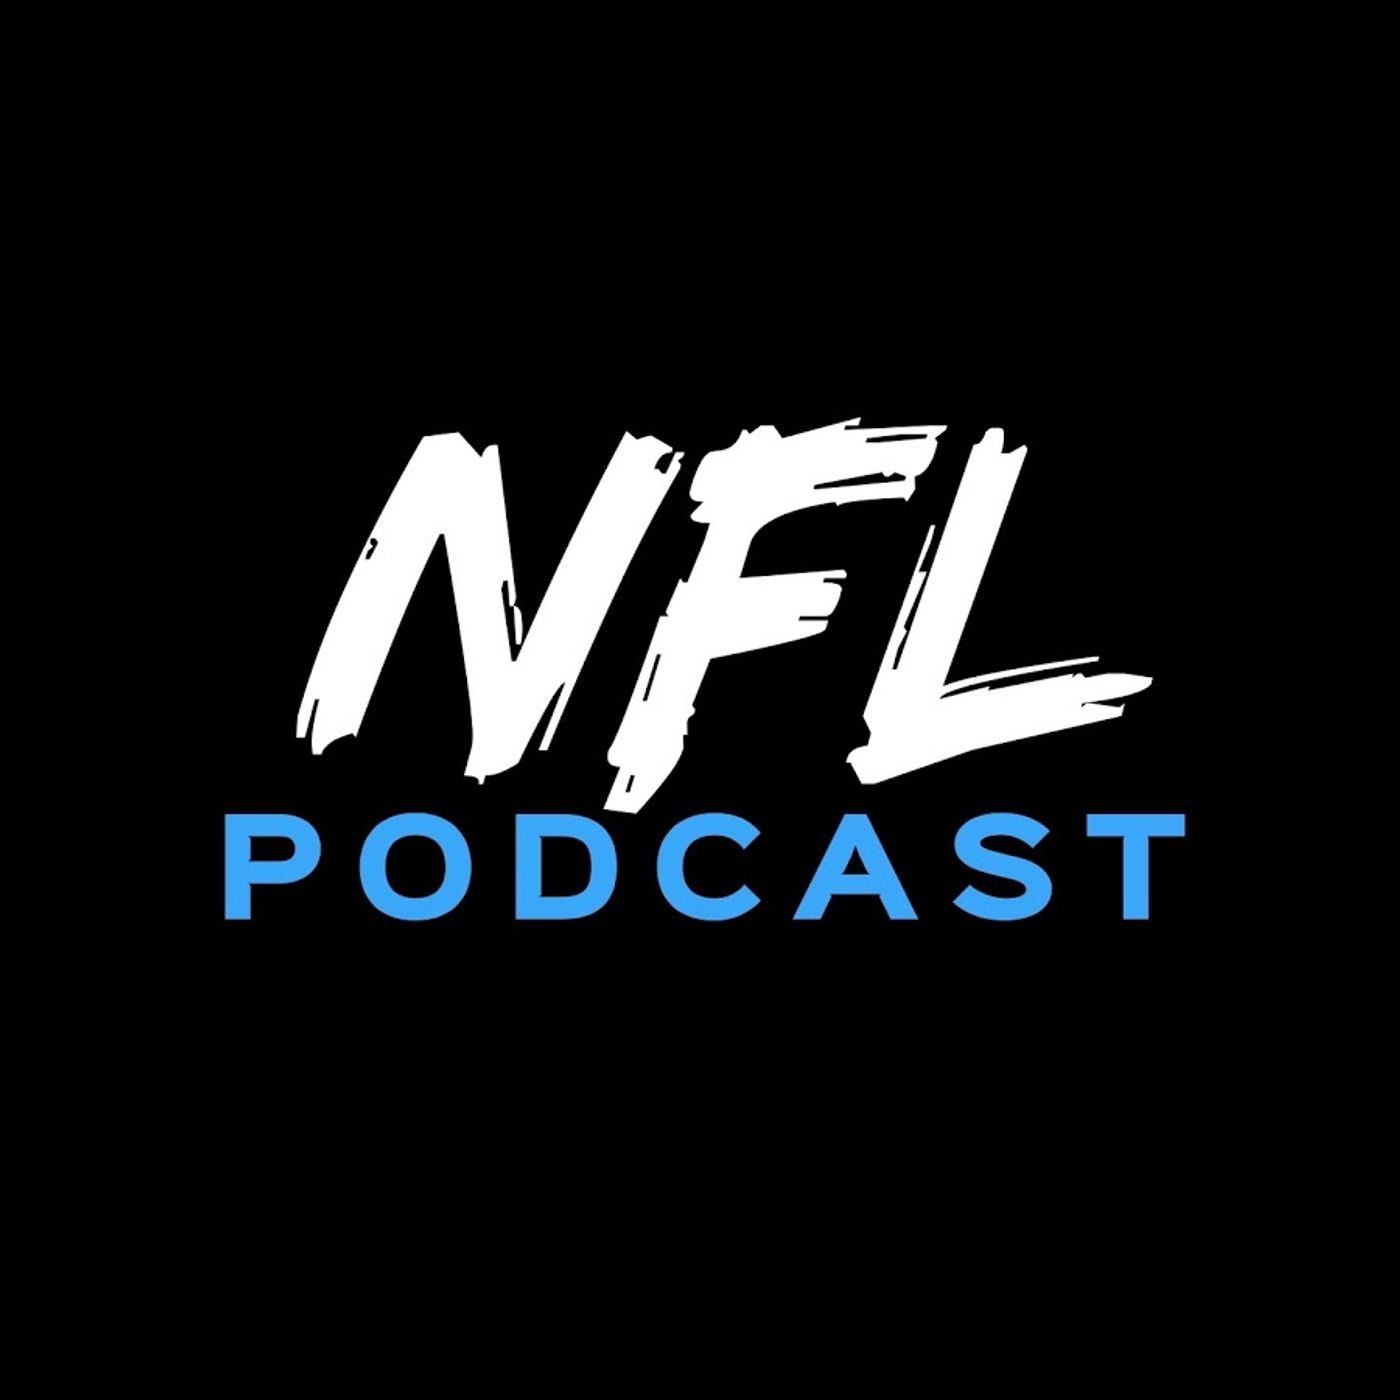 NFL PODCAST ROUND 1 PLAYOFFS WILDCARD WEEKEND PICKS YOUR FIRED NEWS AND NOTES